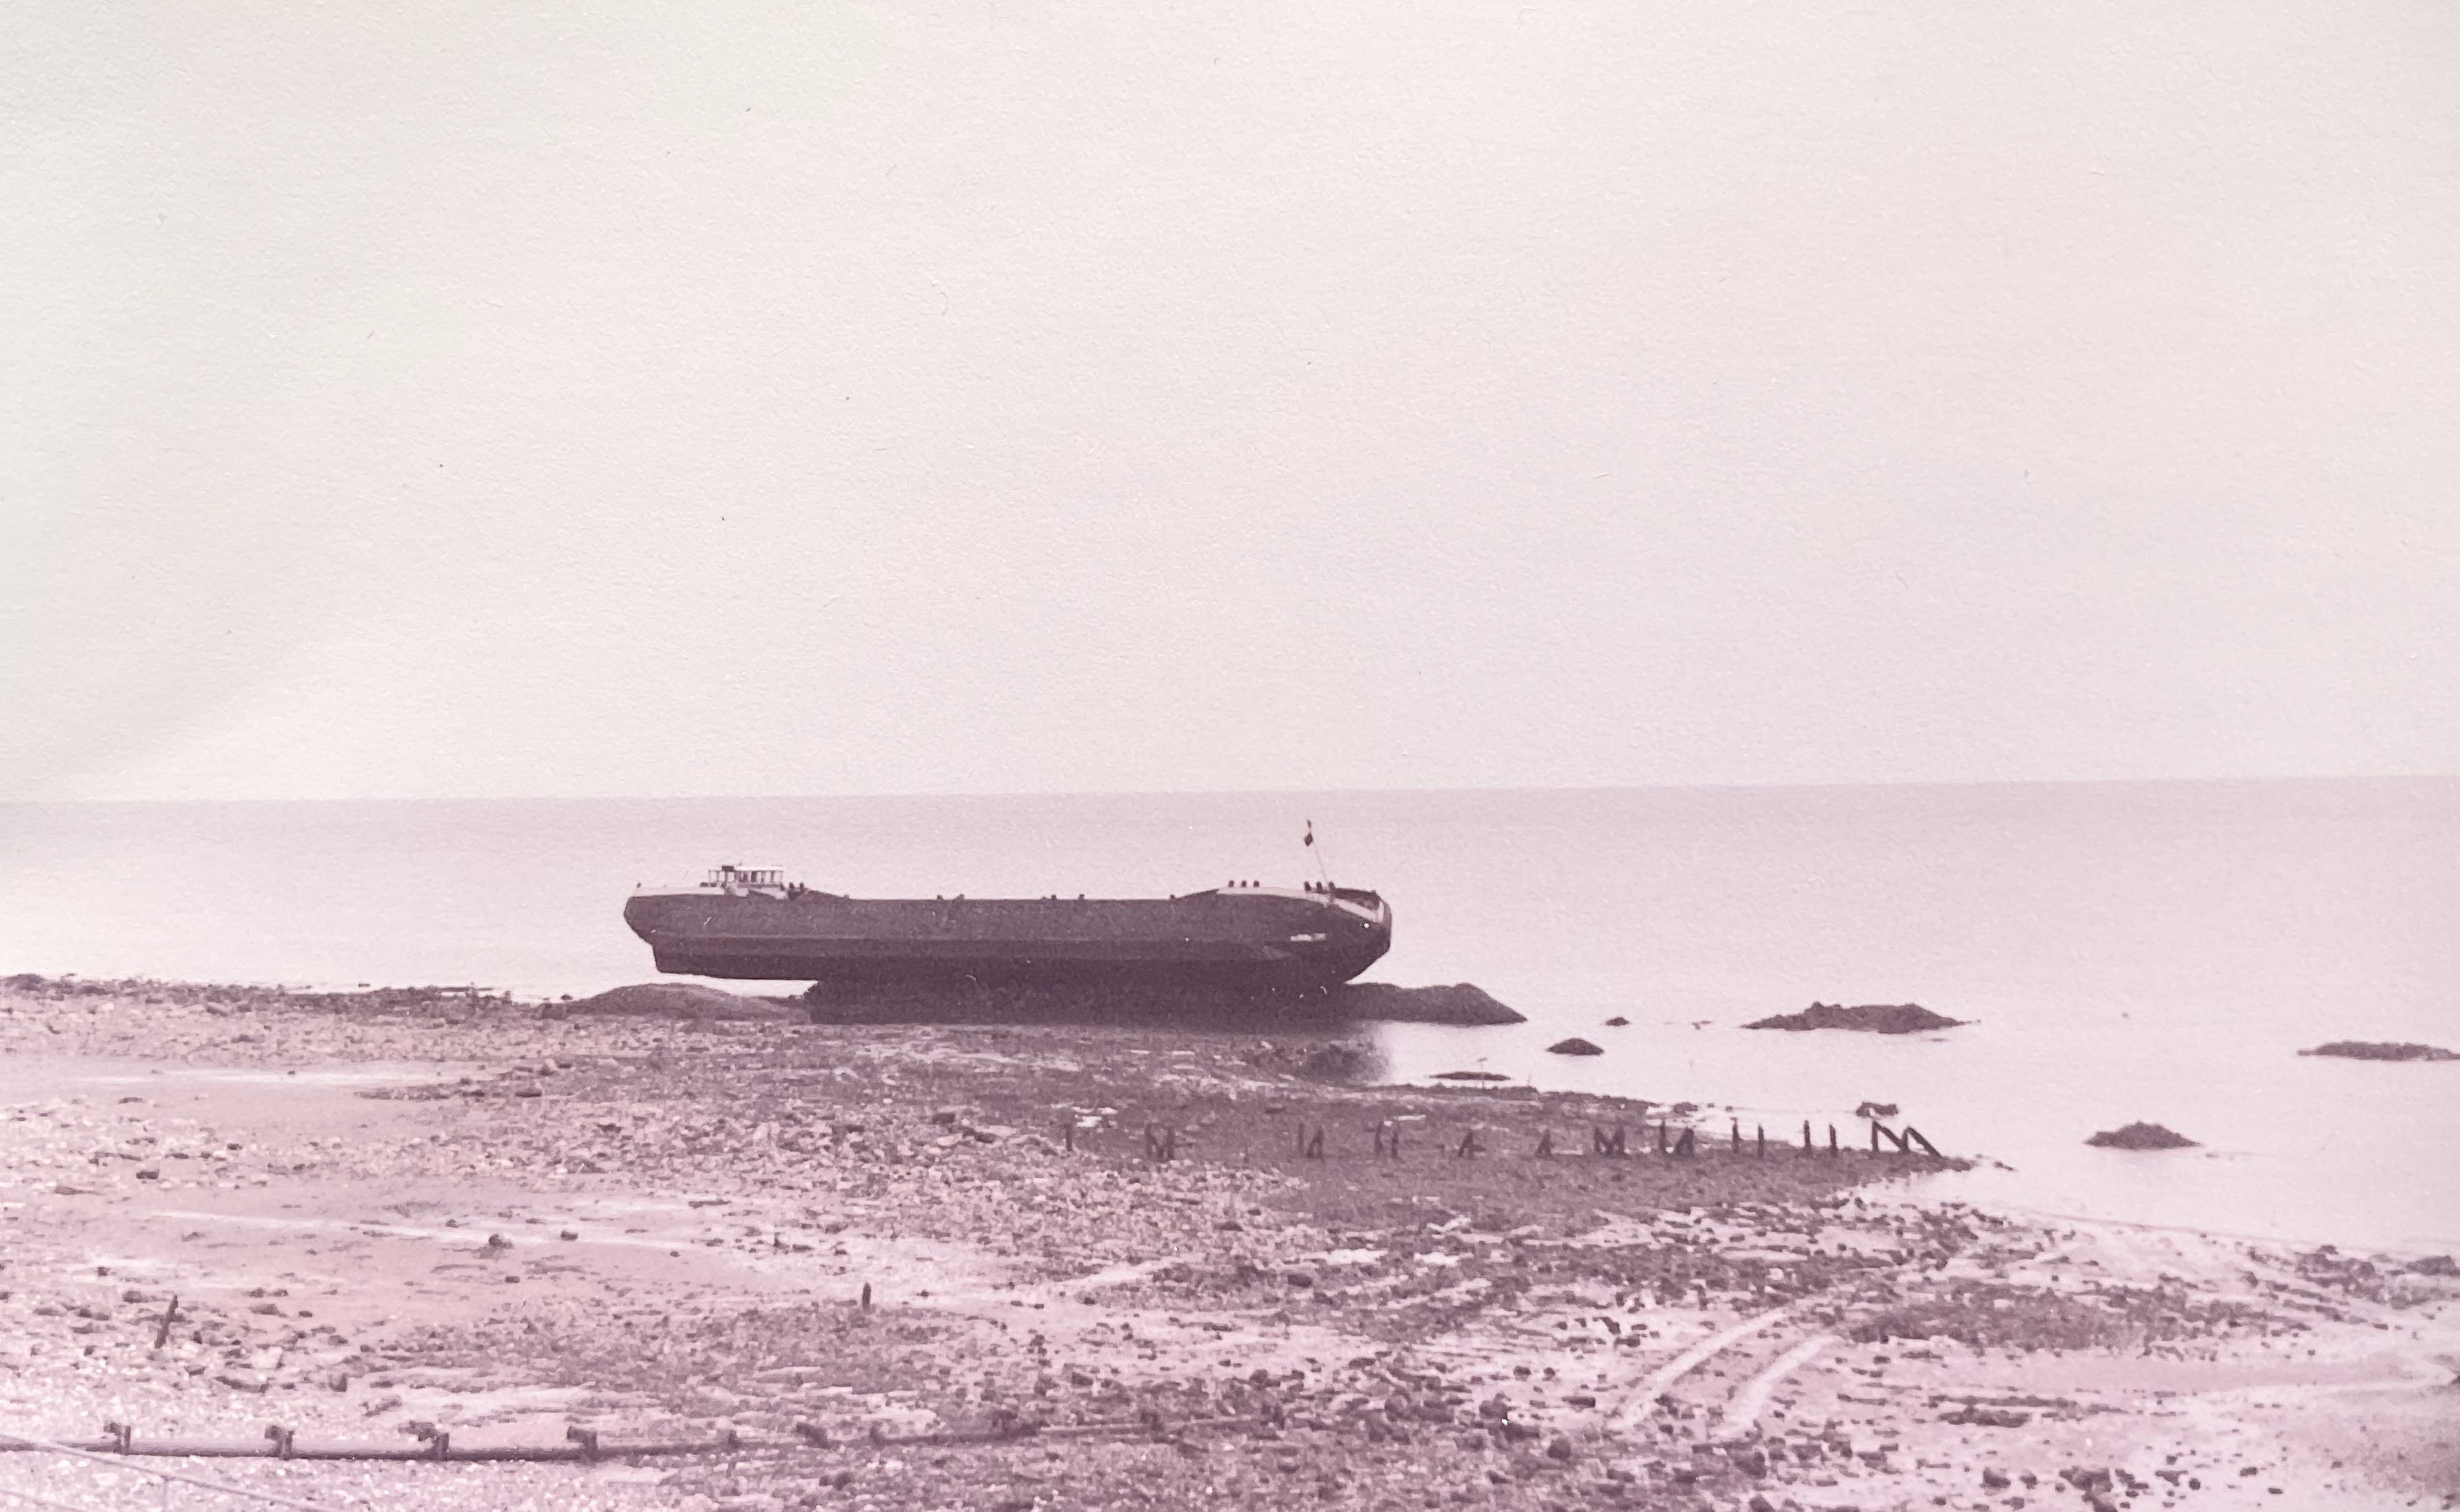 A barge balanced on the rocks it had dropped but on which it is now grounded